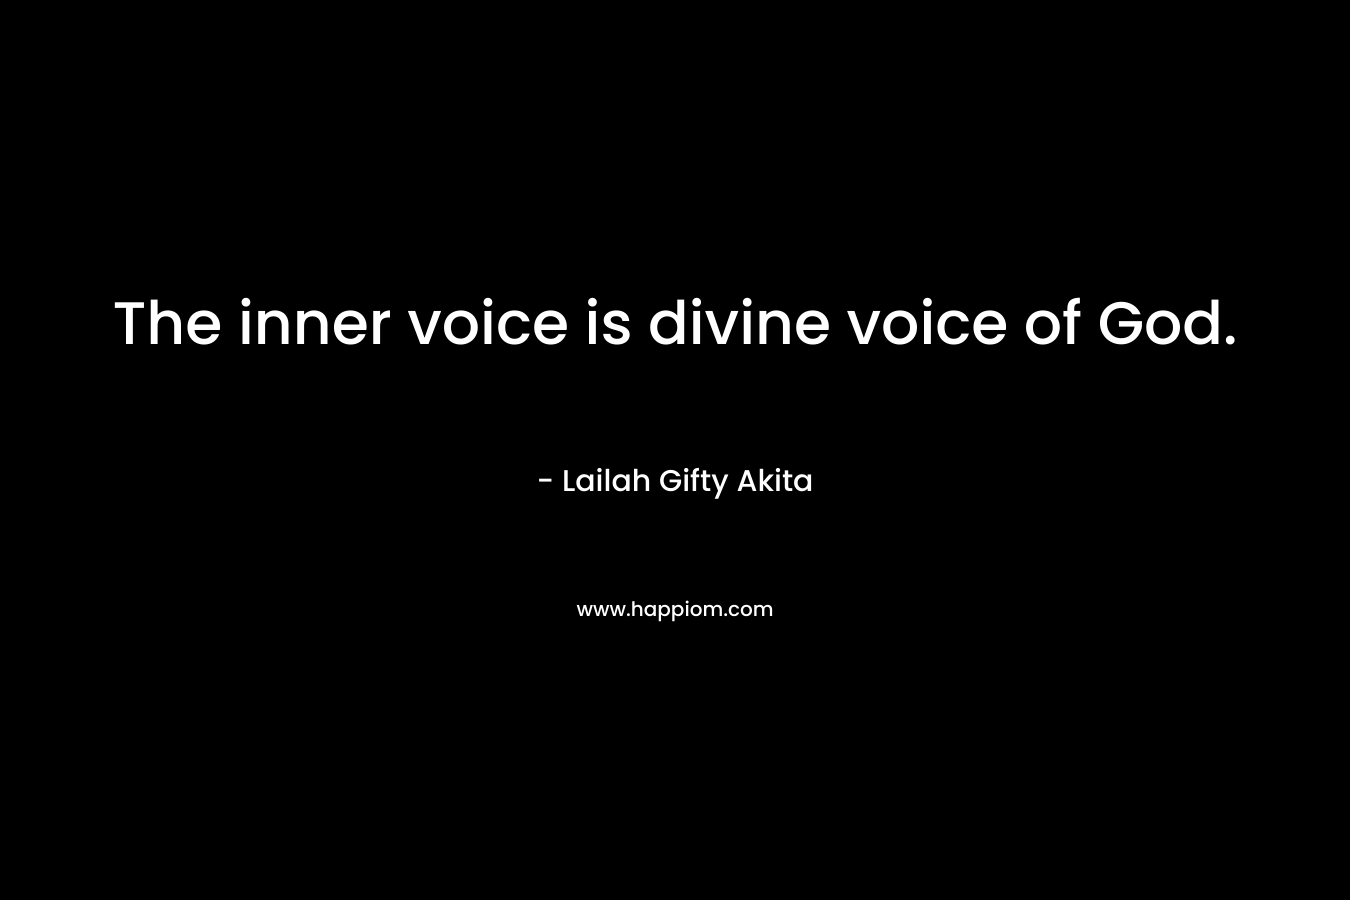 The inner voice is divine voice of God.